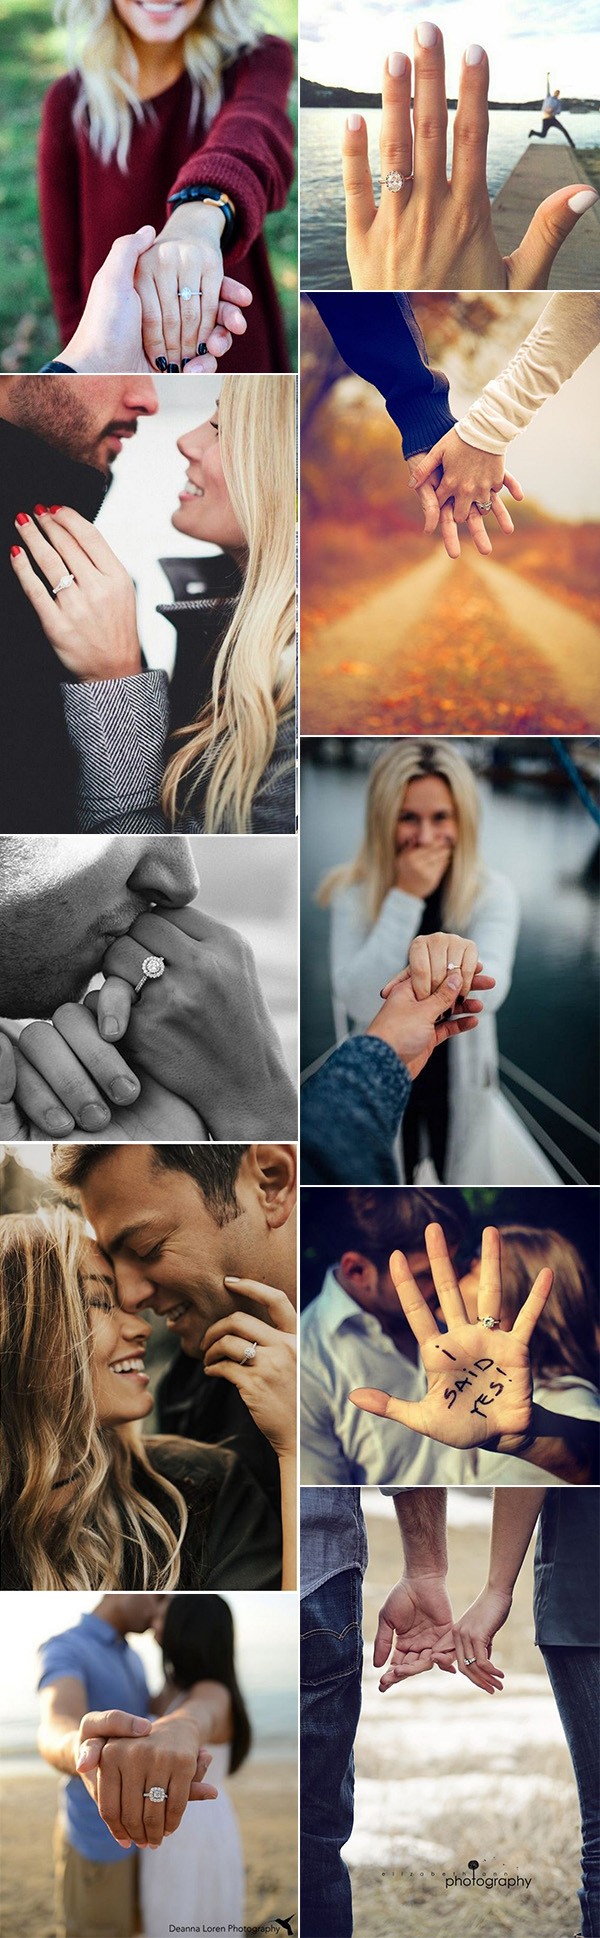 30 Engagement Ring Photo and Selfie Ideas